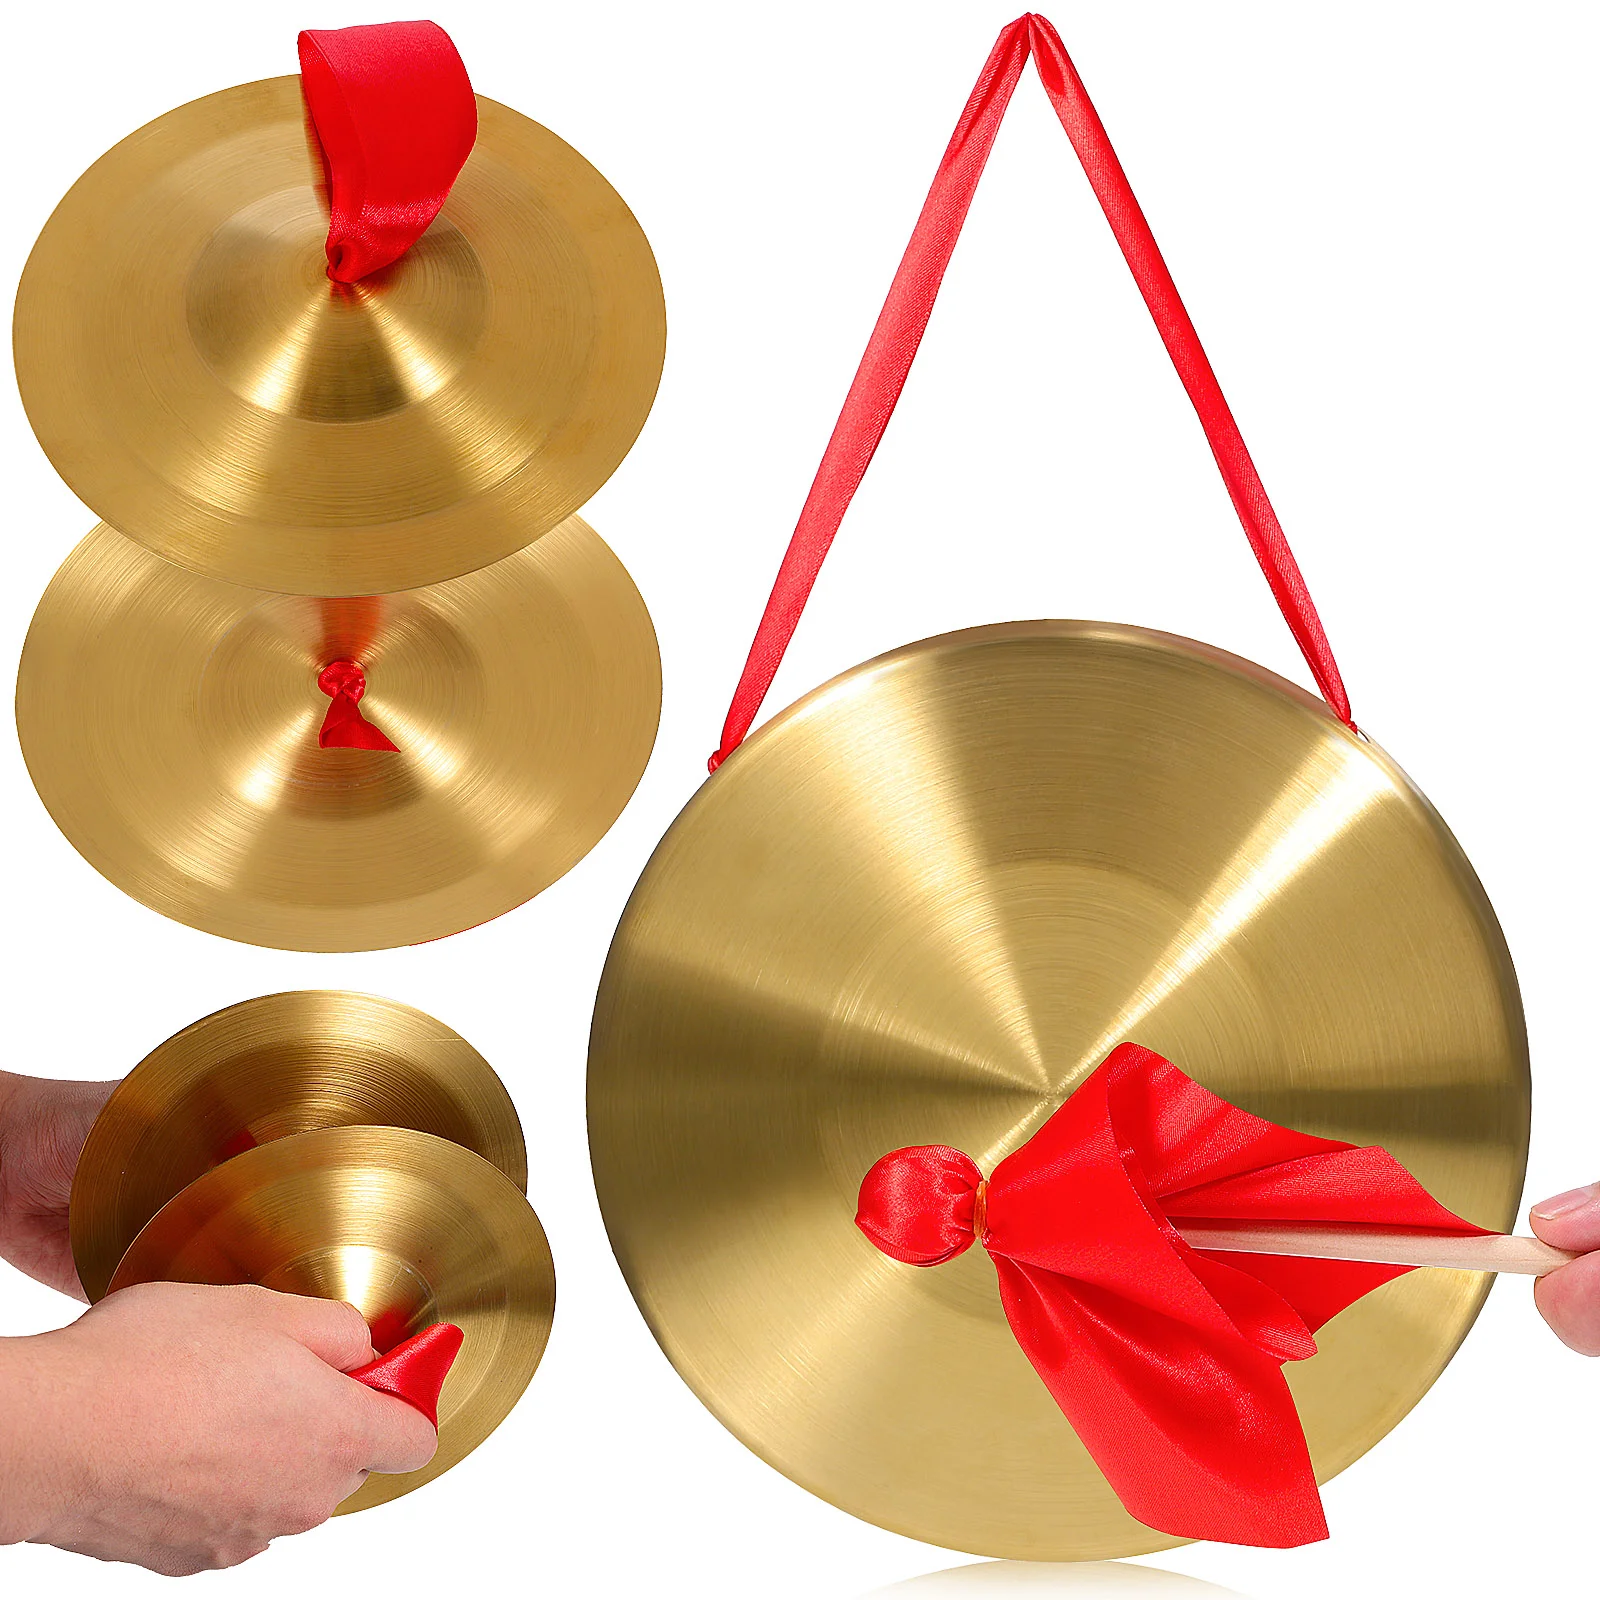 

Hand Gong With Hammer Mini Copper Cymbals Play Cooper Percussion Instrument Chinese